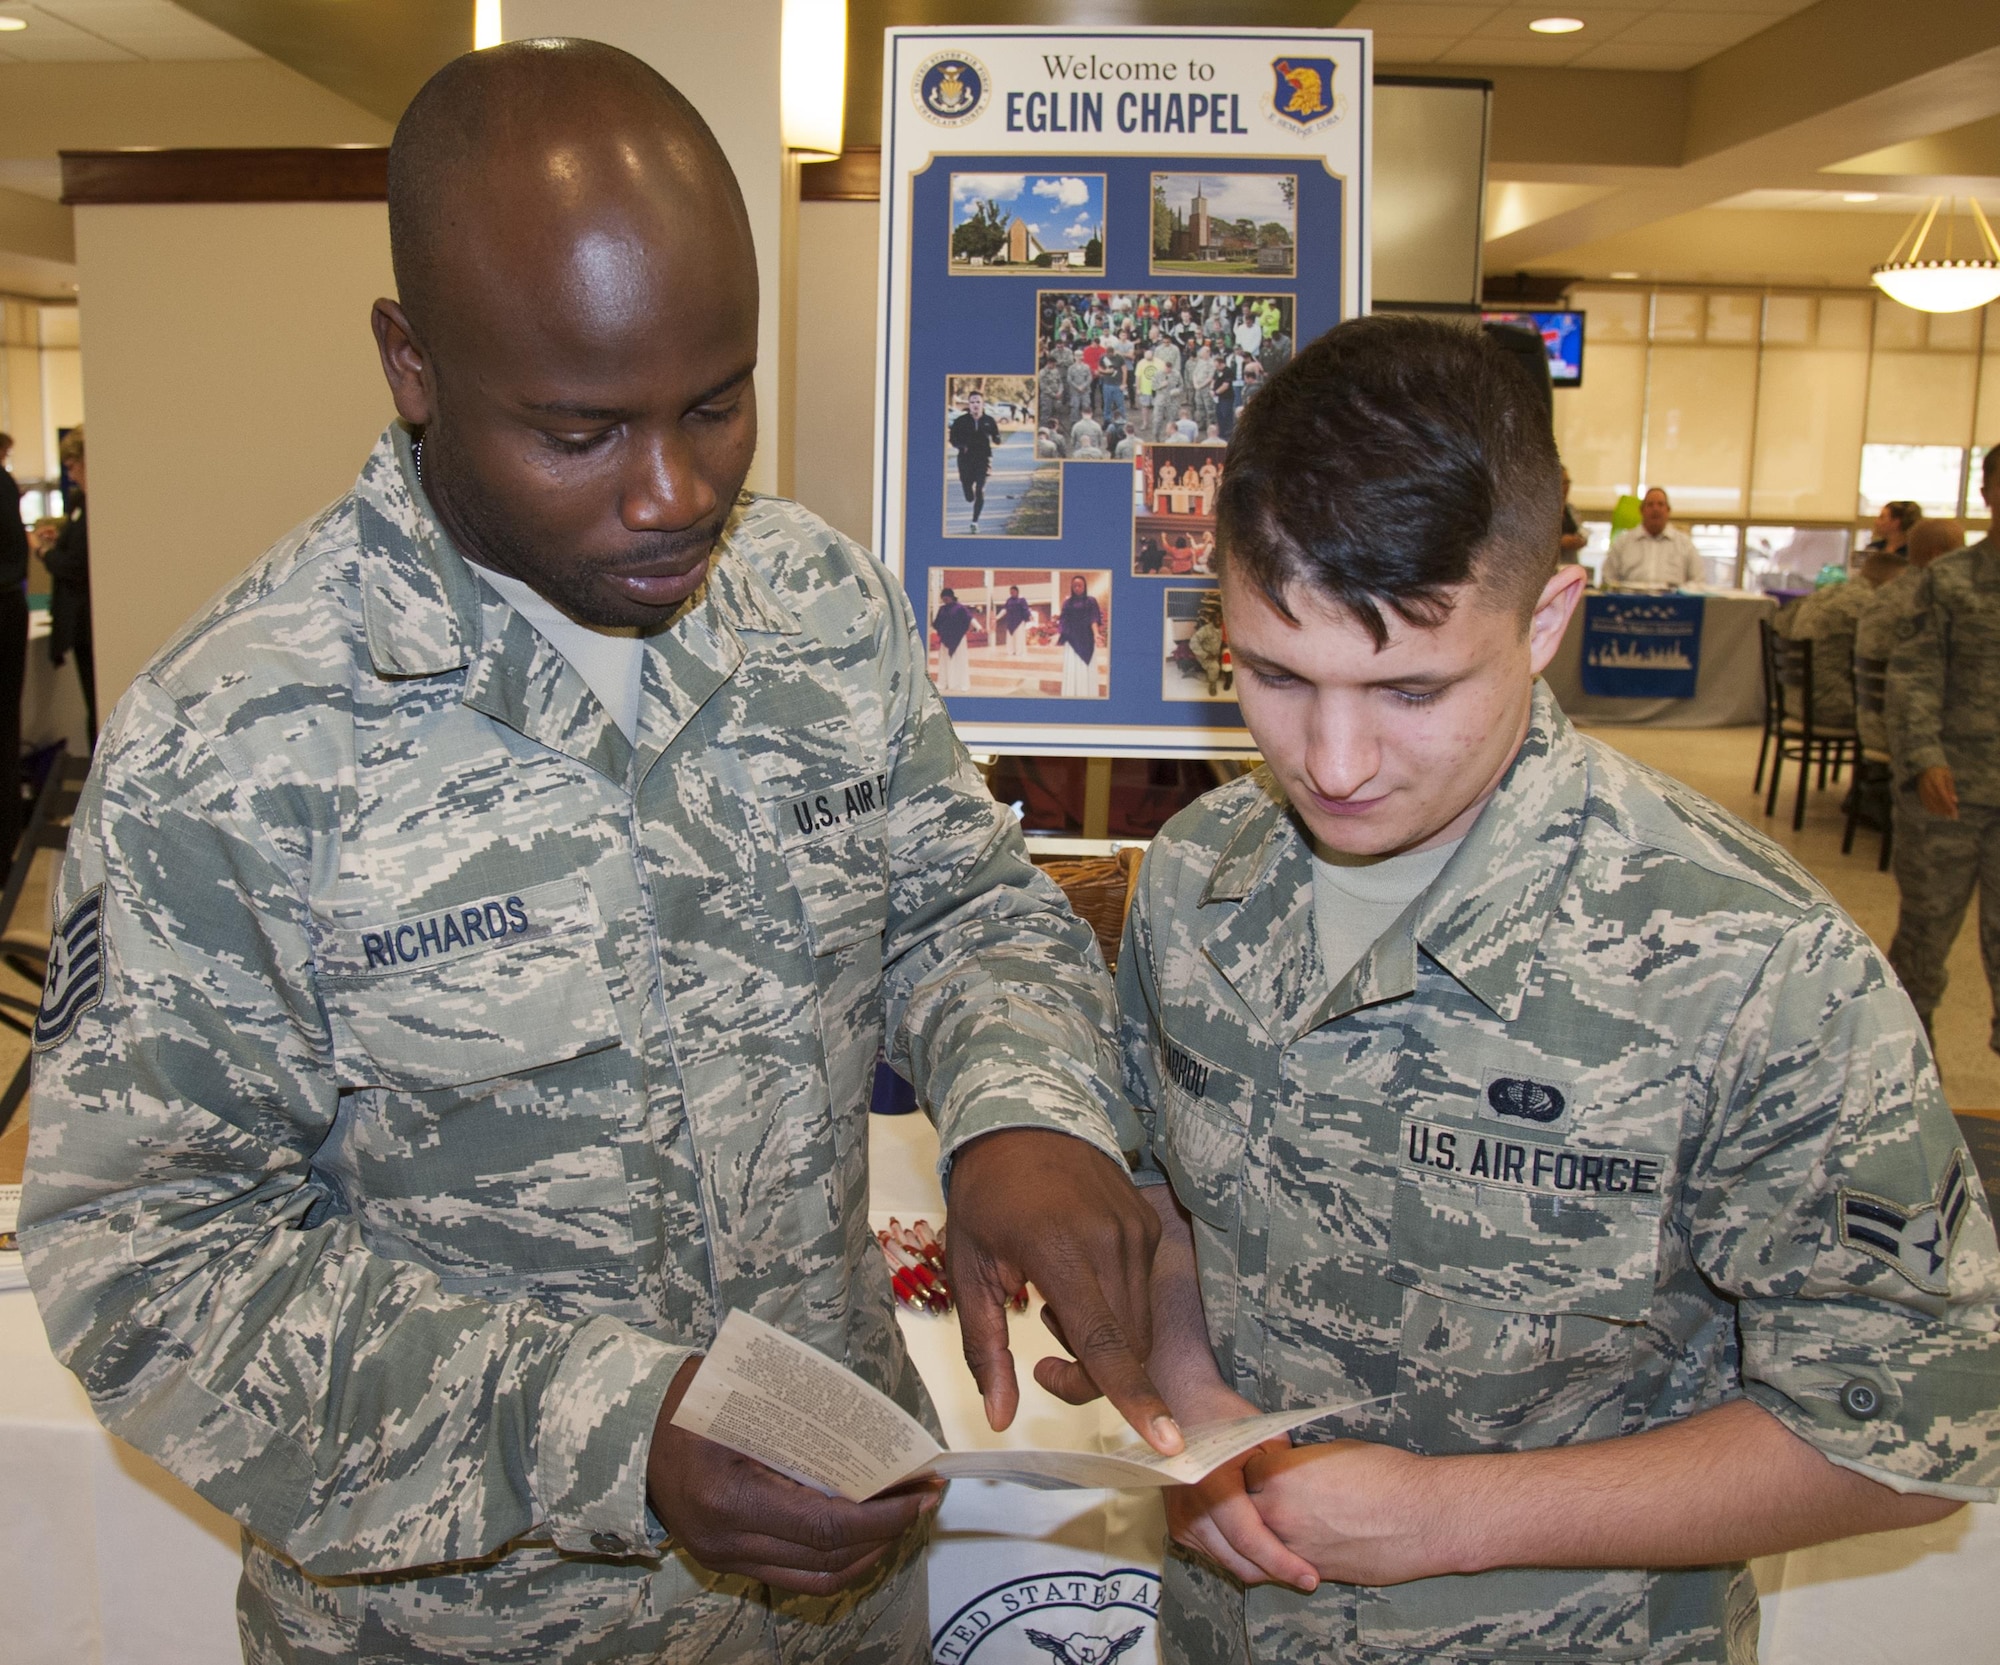 Tech. Sgt. Rudolph Richards, a Chapel assistant, described chapel services to Airman 1st Class Nicholas Gurrou, 96th Force Support Squadron, at the ‘Cornucopia of Care’ event Nov. 9 at the Breeze Dining Facility at Eglin Air Force Base, Fla.  The event brought together 25 base and local agencies who offered attendees reference materials, promotional items and guidance.  (U.S. Air Force photo/Kevin Gaddie)    